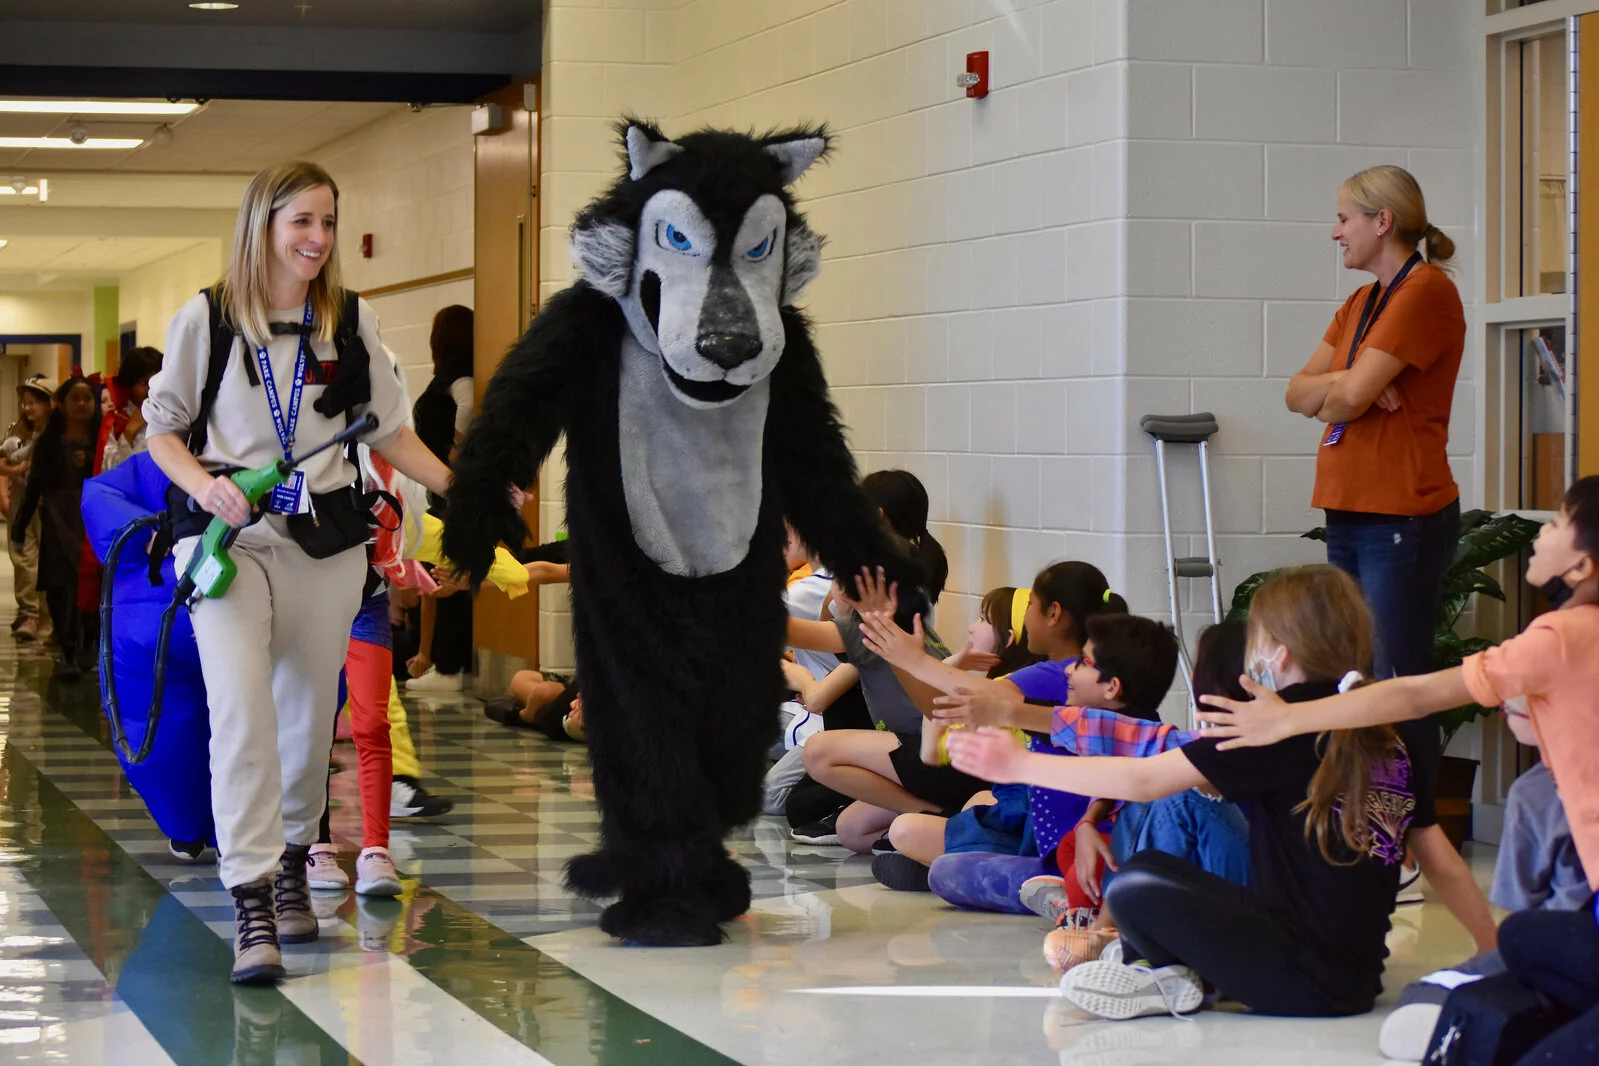 Park Campus Halloween Parade showing the PC mascot Wolfie high fiving students sitting in the hallway